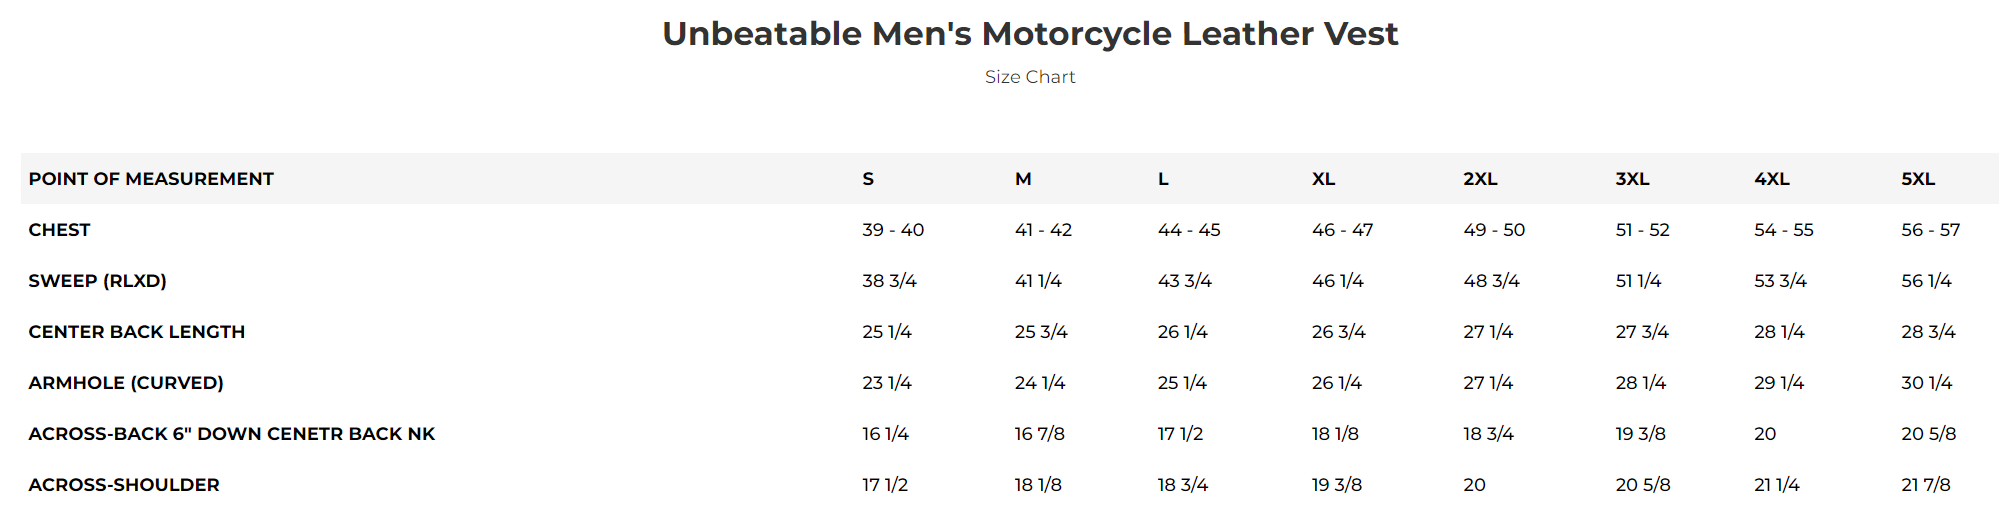 Size chart for men's Unbeatable leather motorcycle vest.